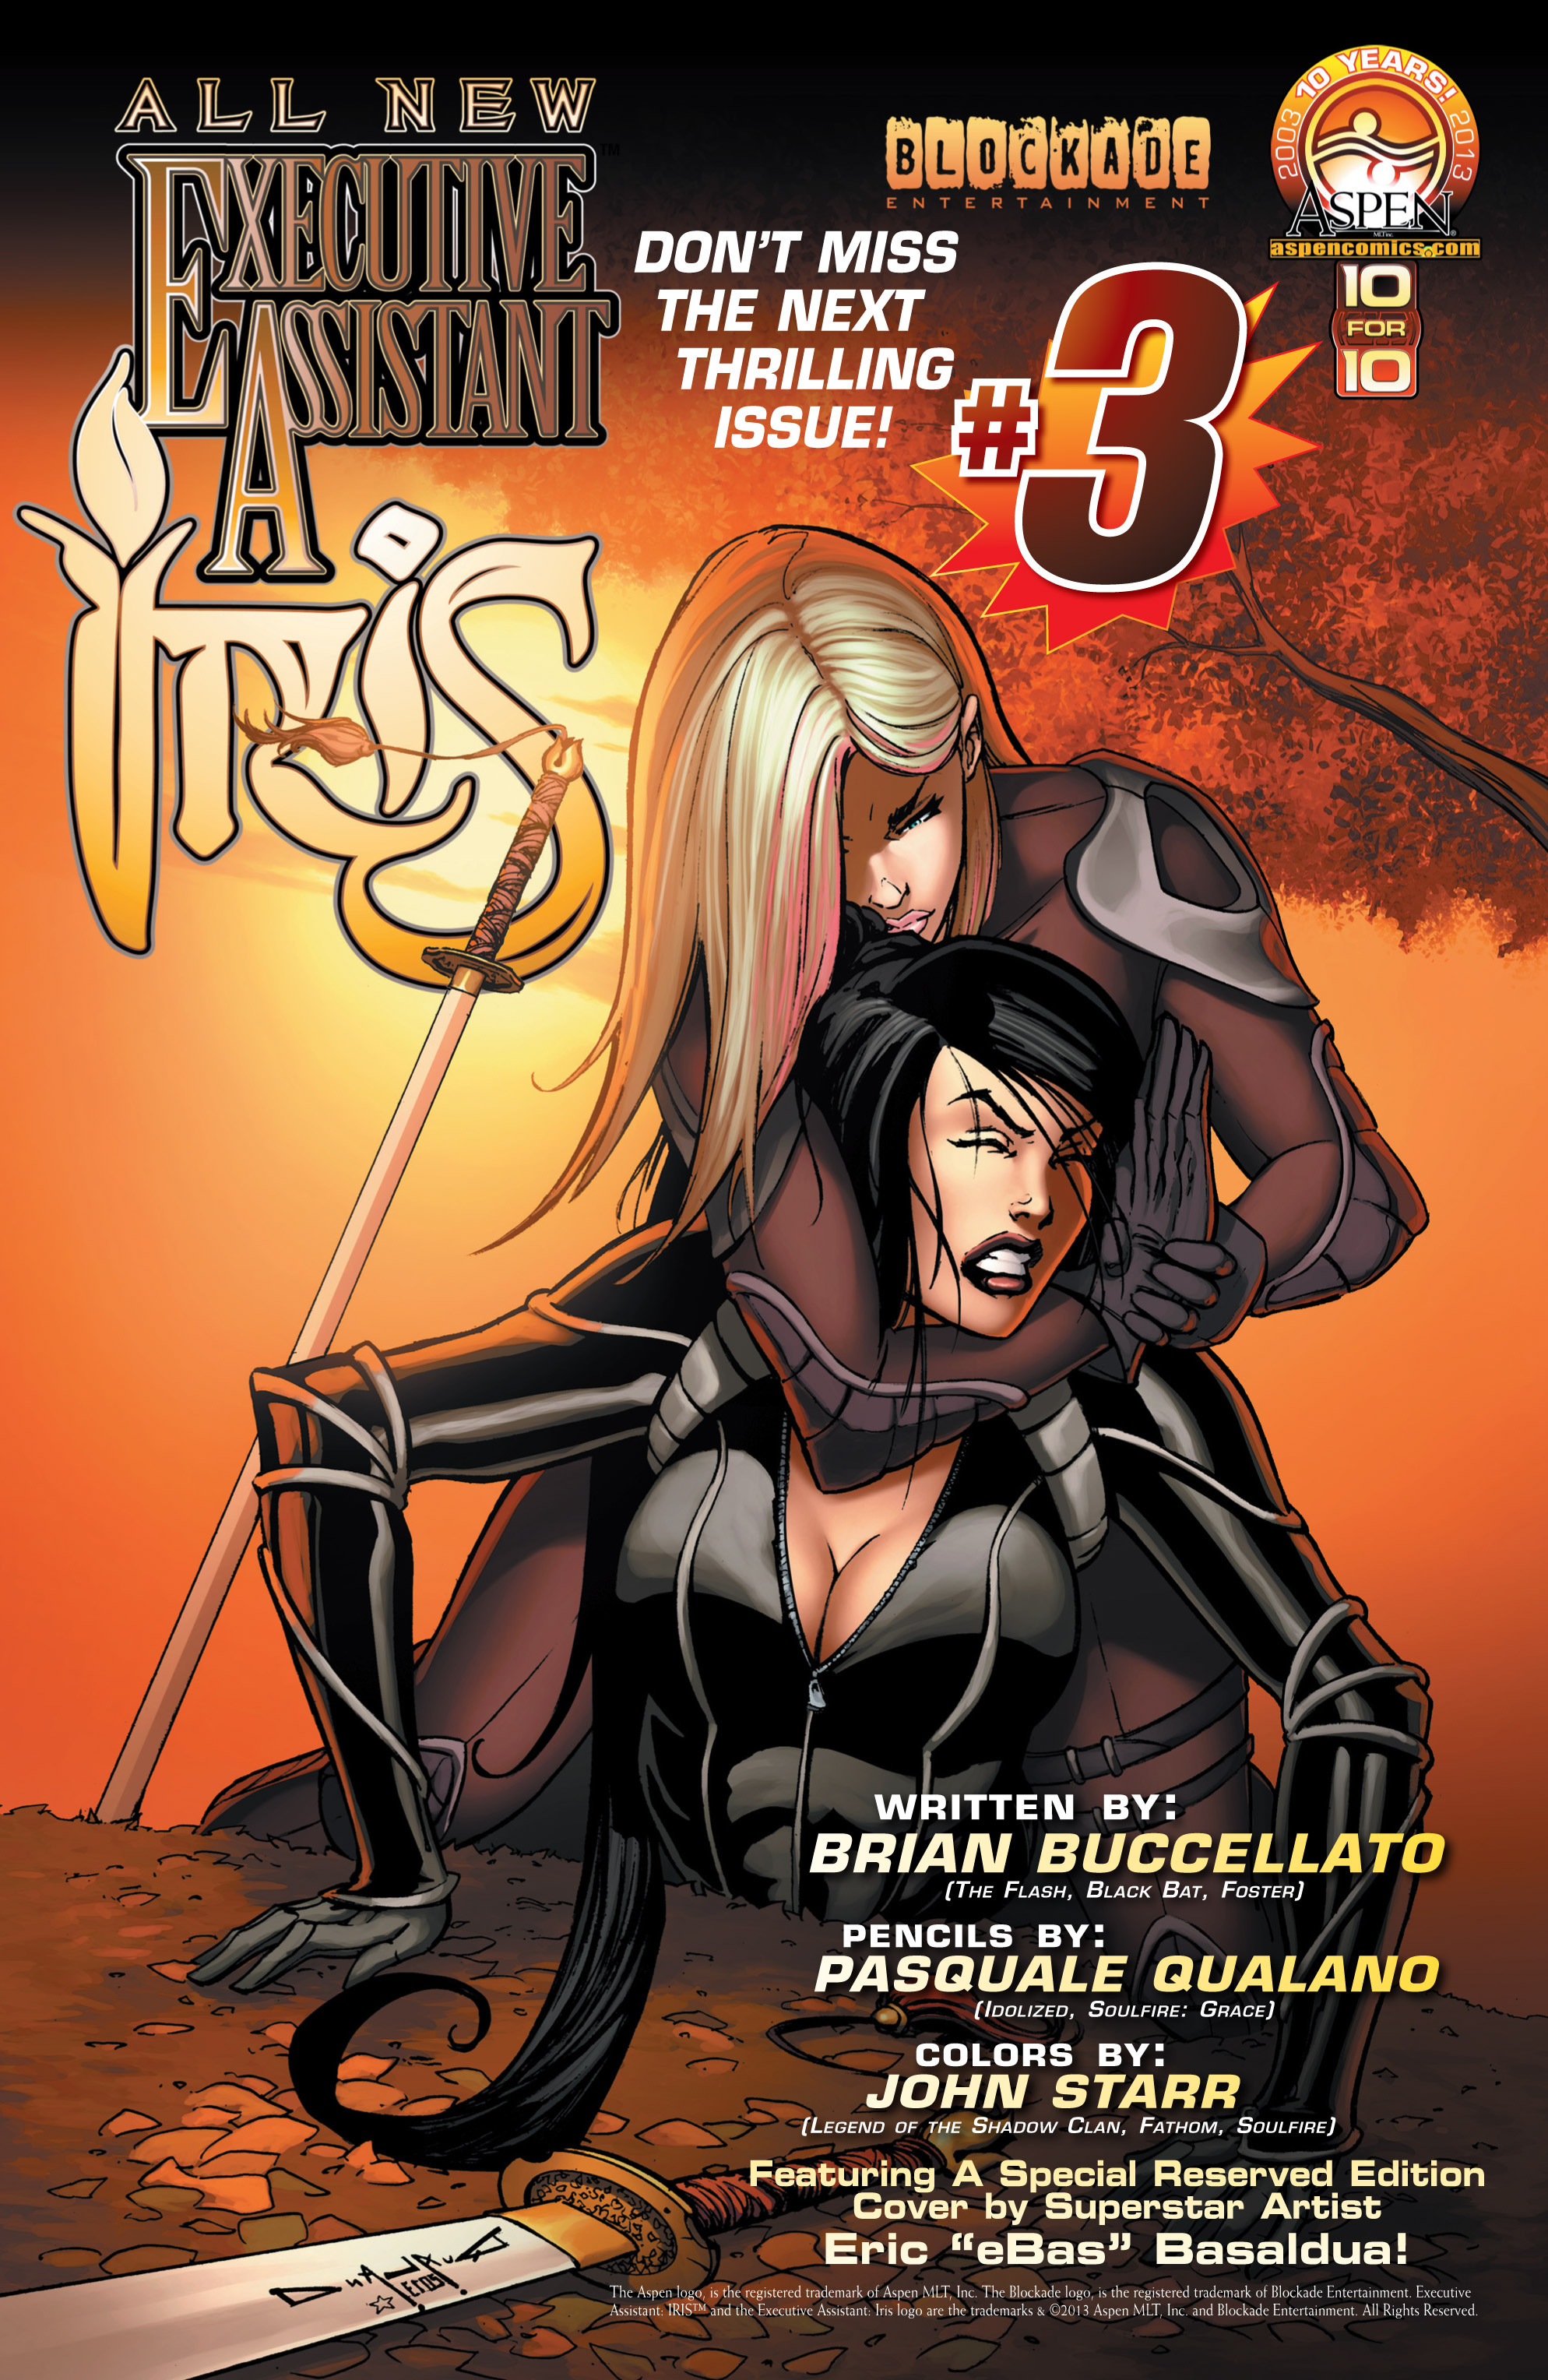 Read online All New Executive Assistant: Iris comic -  Issue # TPB - 48